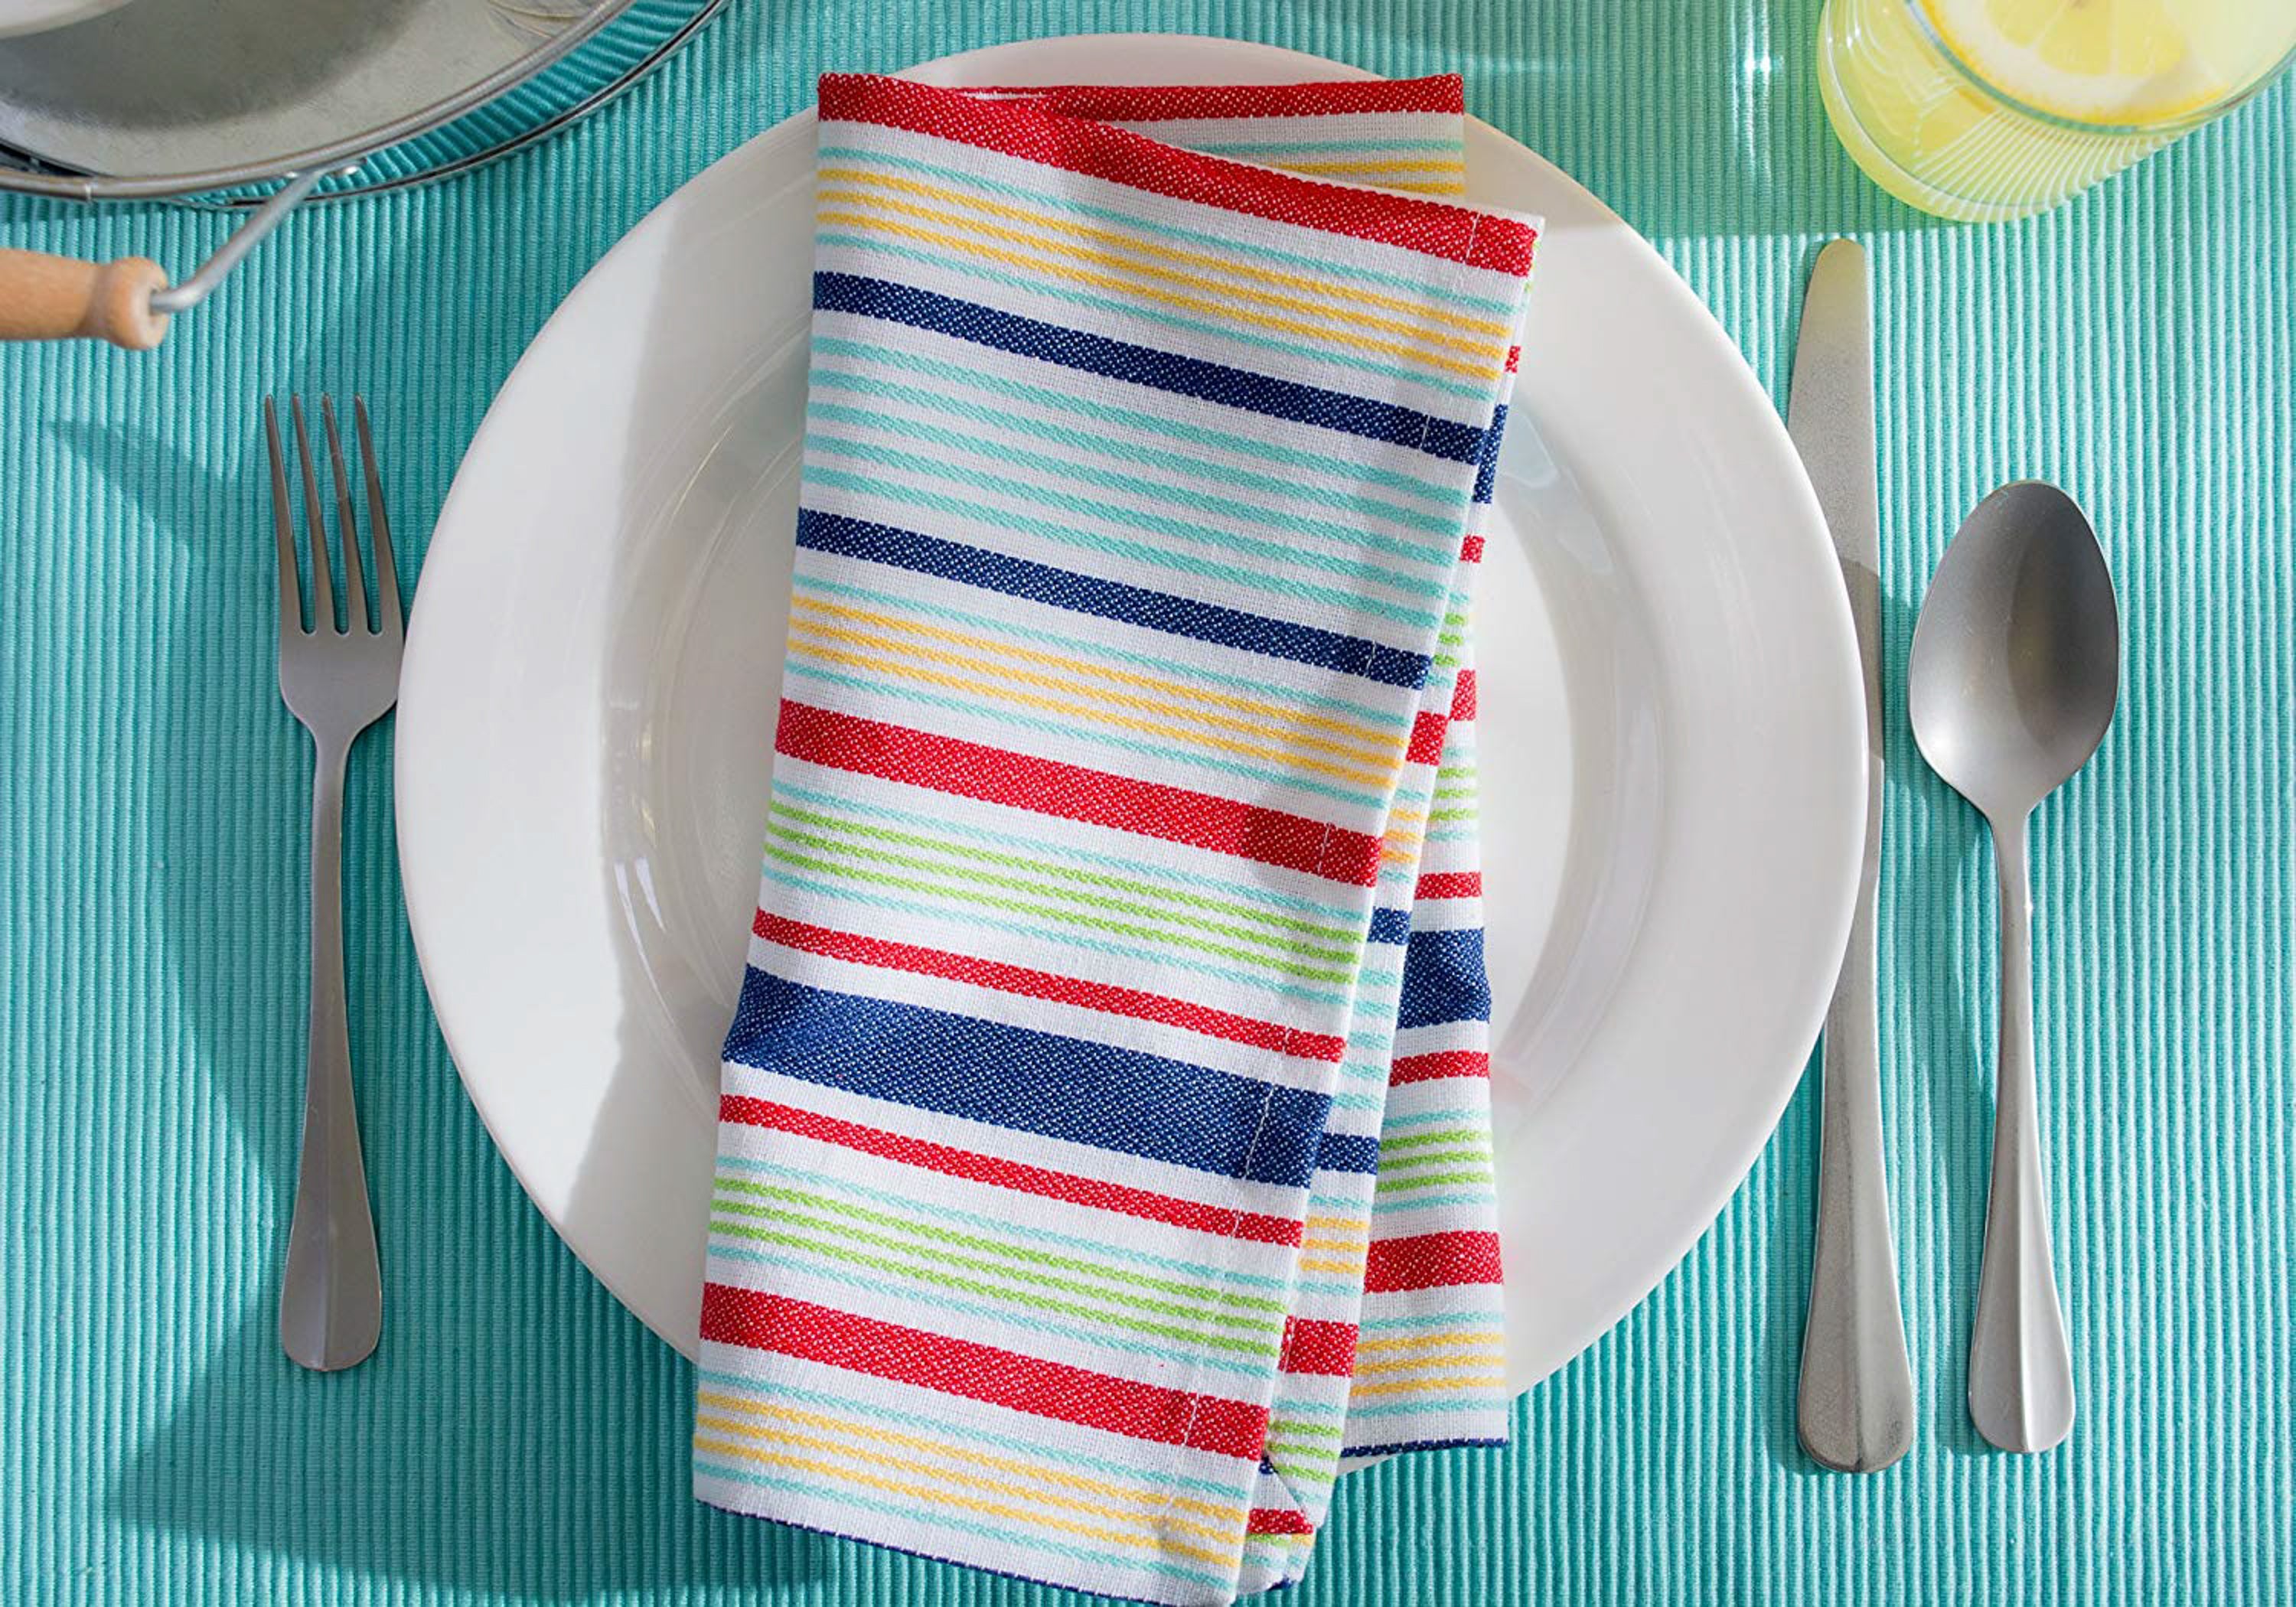 Basic Primary Saturated Stripe Napkin Set of 6 – DII Home Store